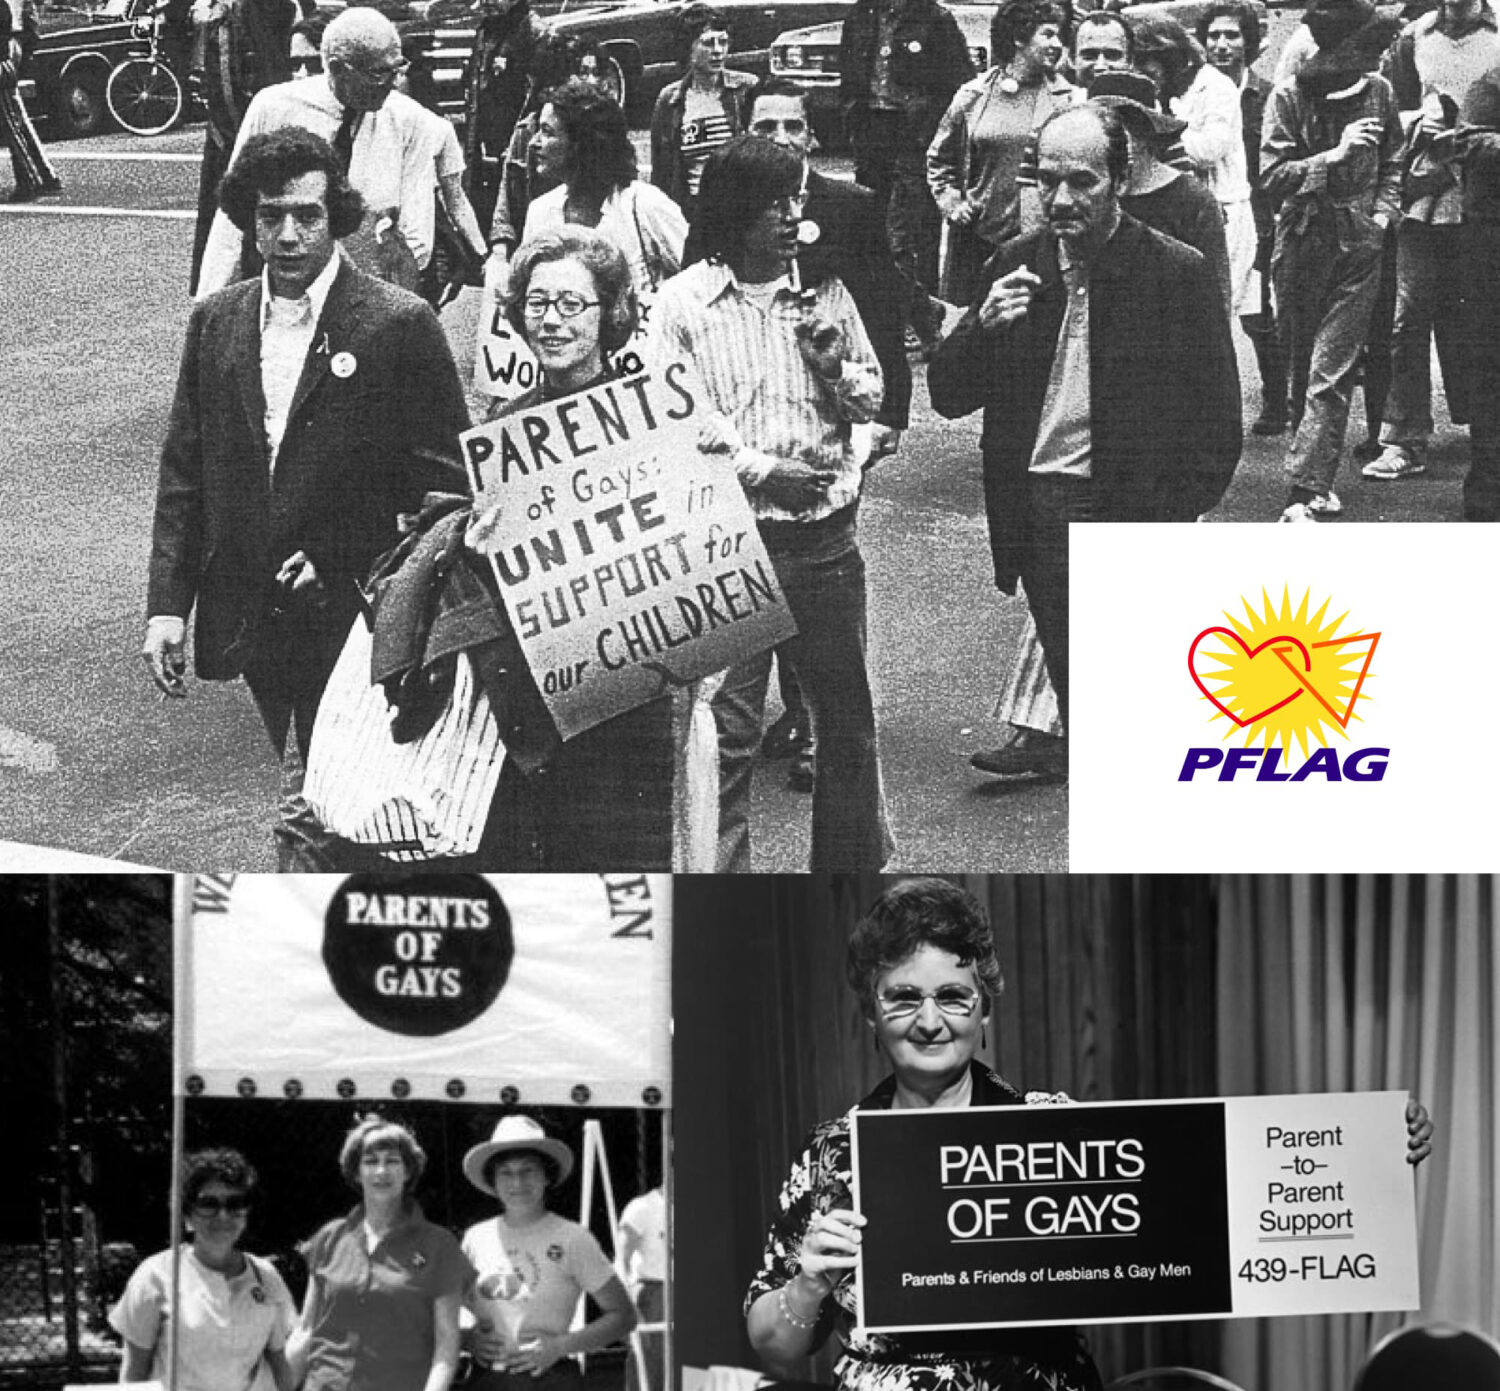 A collage of history photos from LGBTQ+ rights marches and protests.